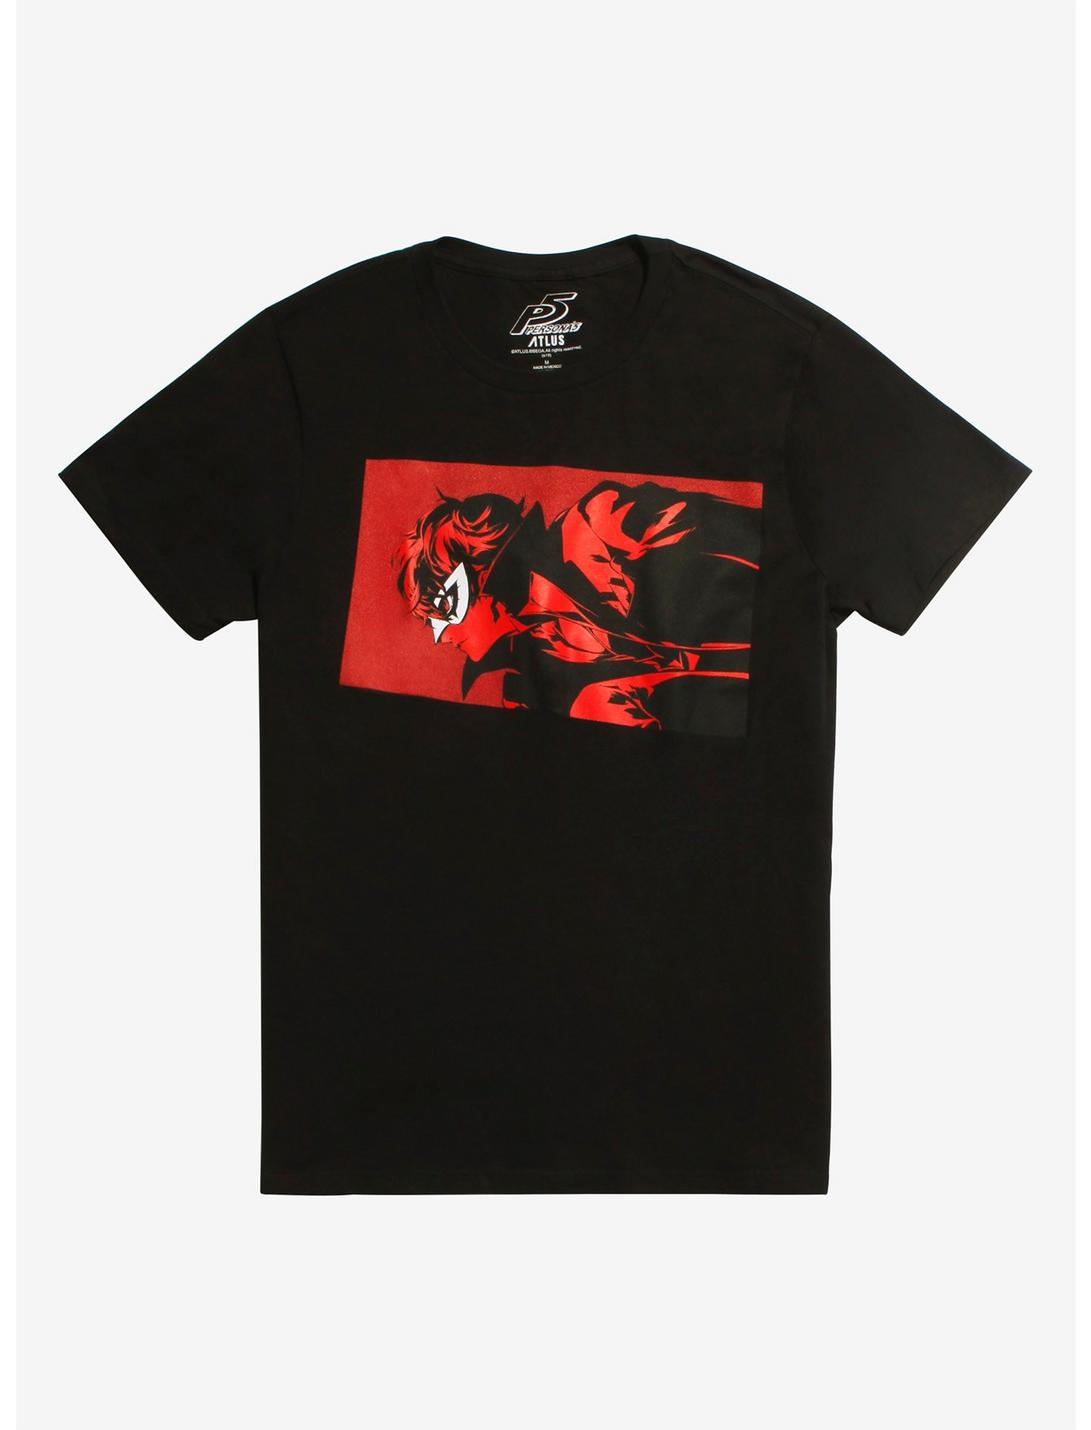 Persona 5 Joker Red & White T-Shirt, RED, hi-res